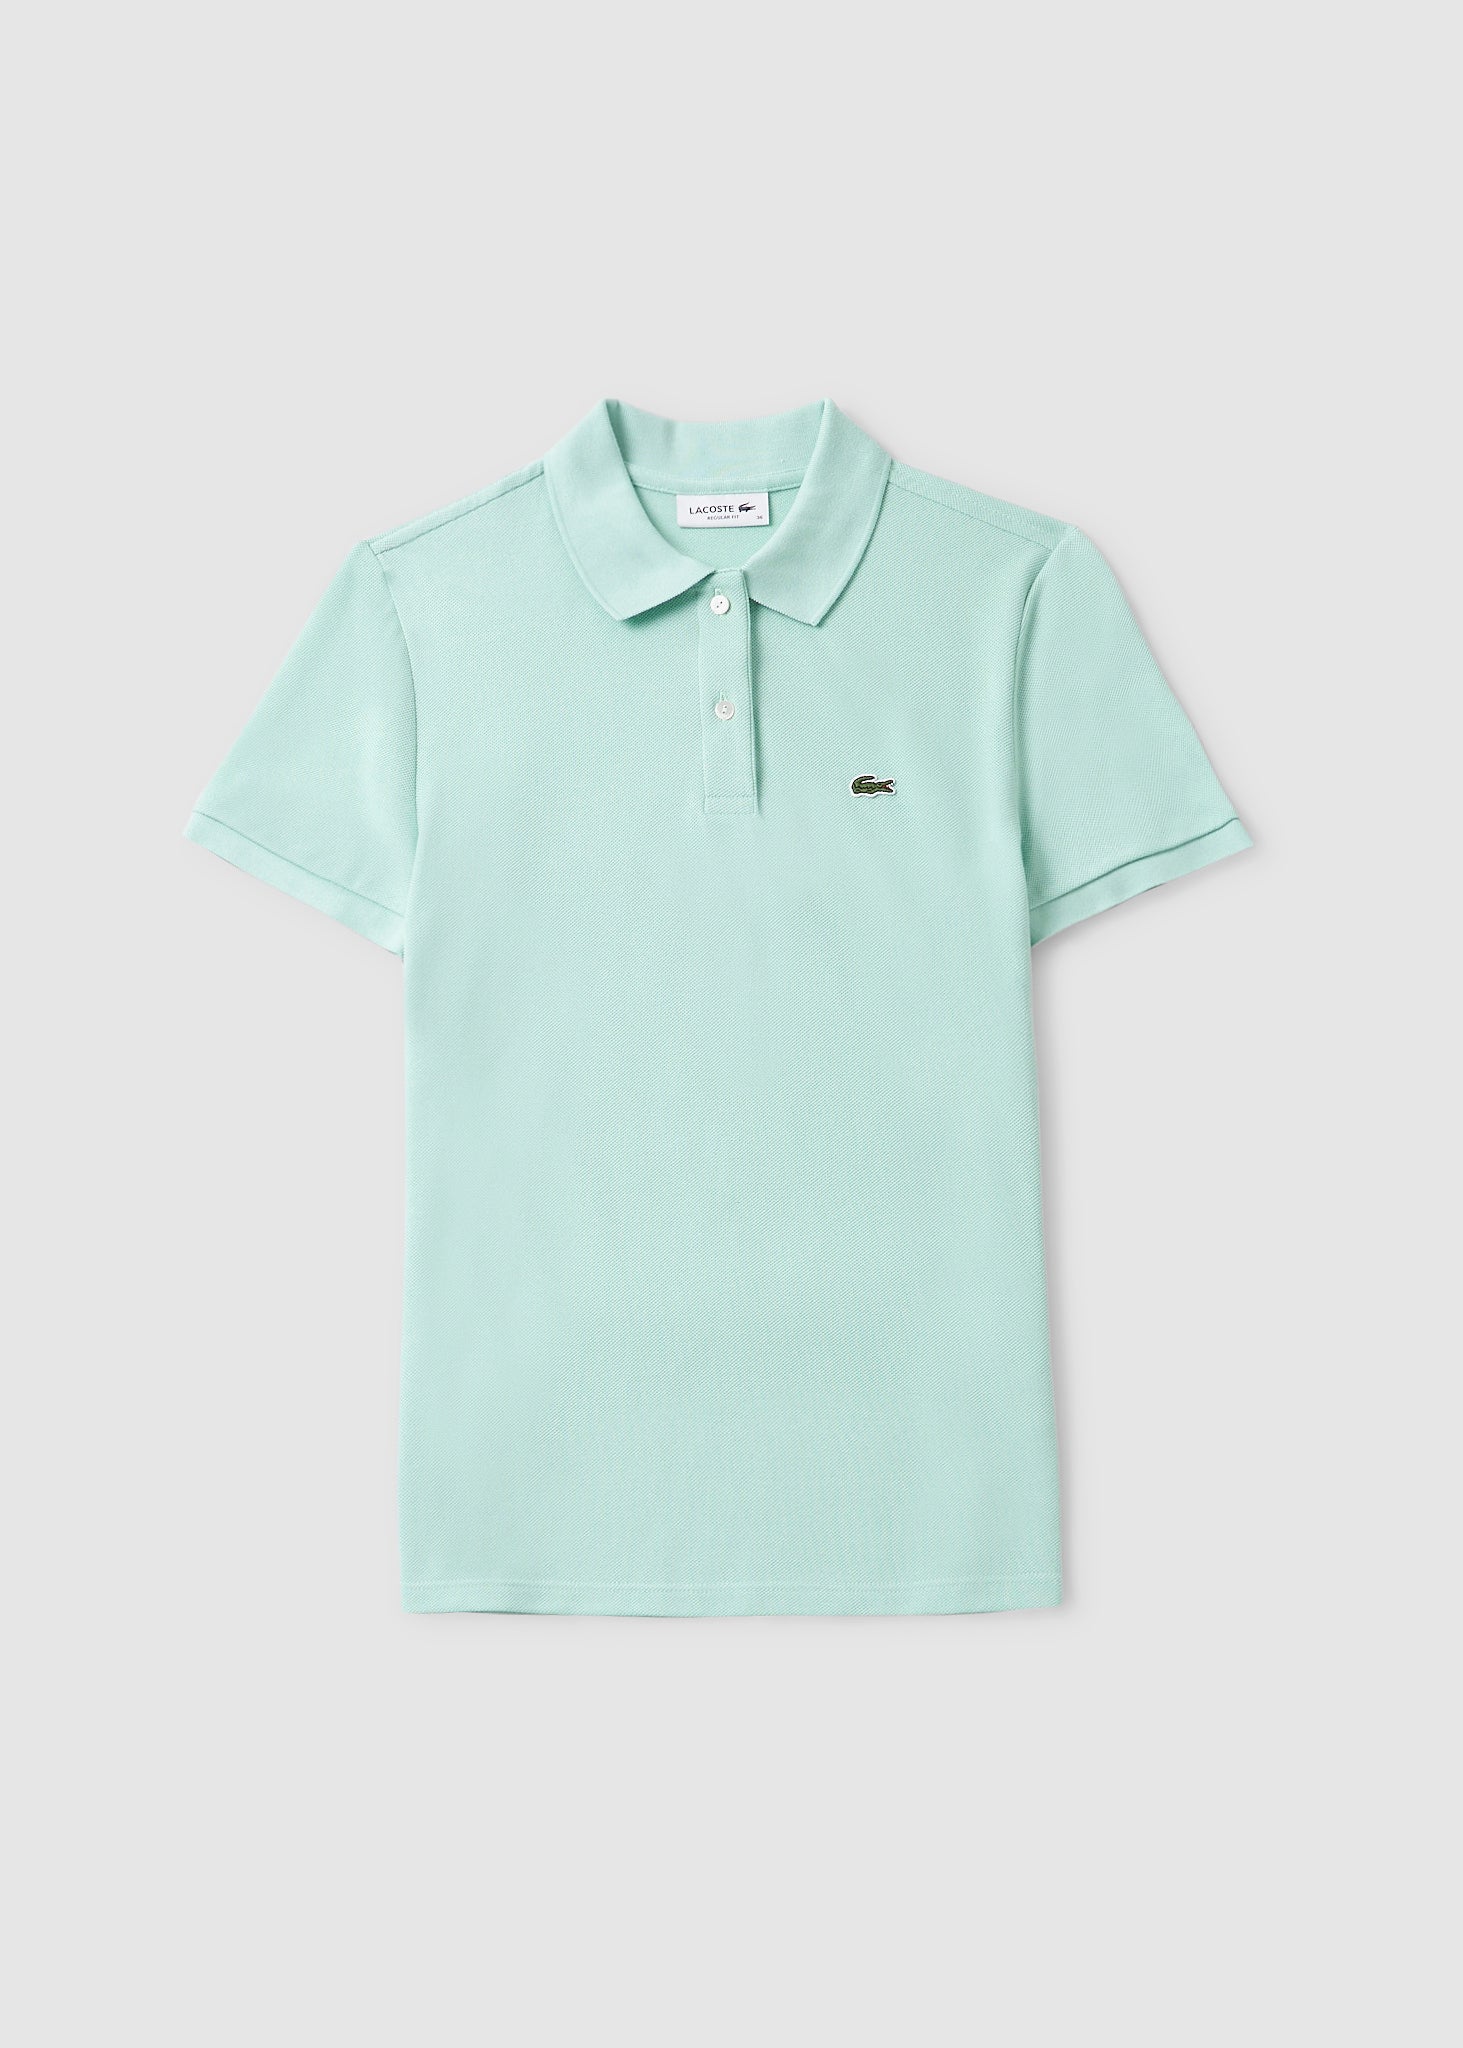 Lacoste Womens Classic Pique Polo Shirt In Pastille Mint - Green